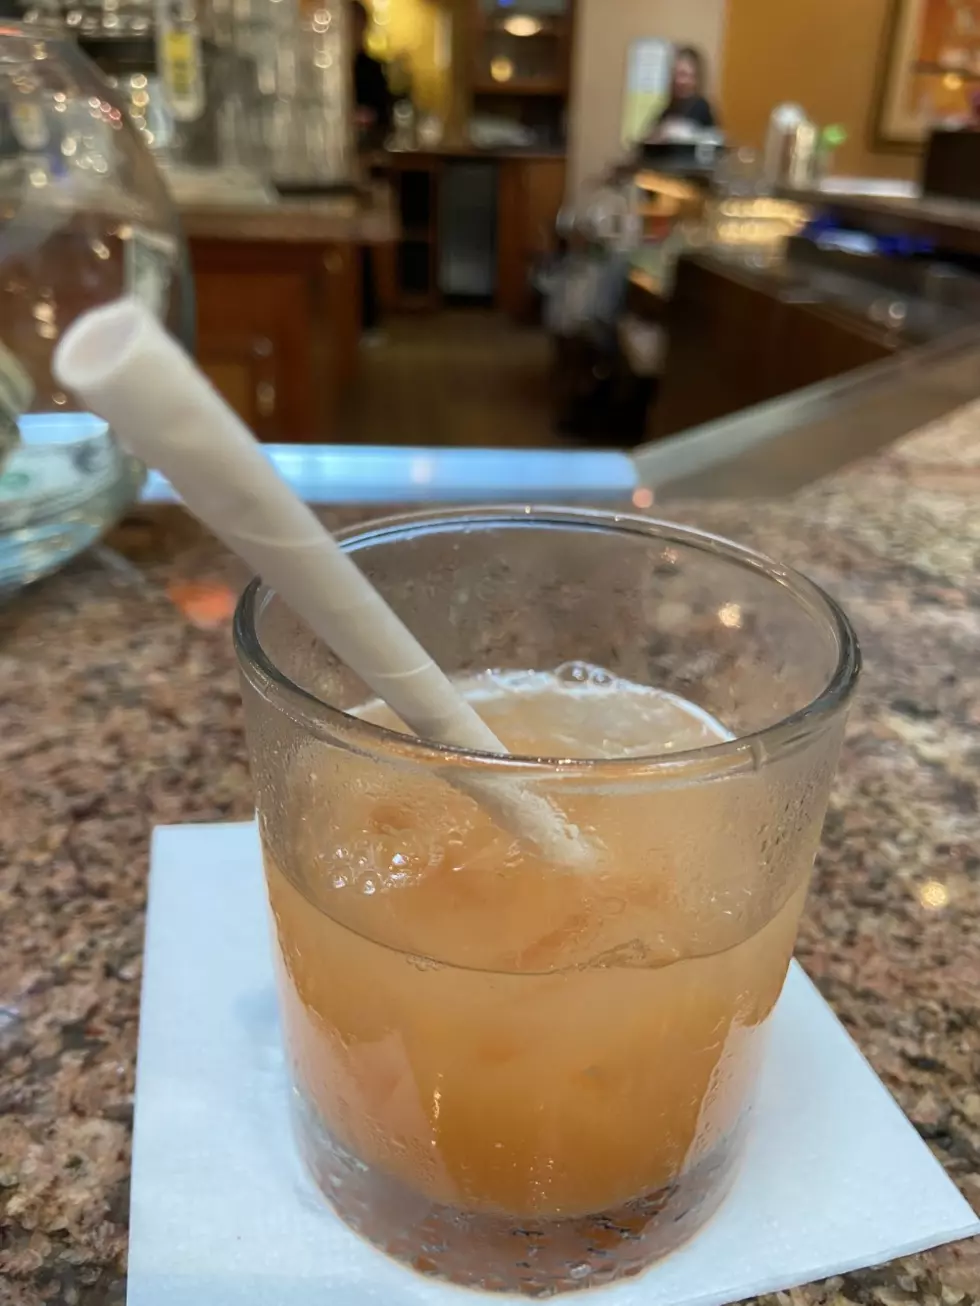 Should Plastic Straws Be Banned in the State of Louisiana?